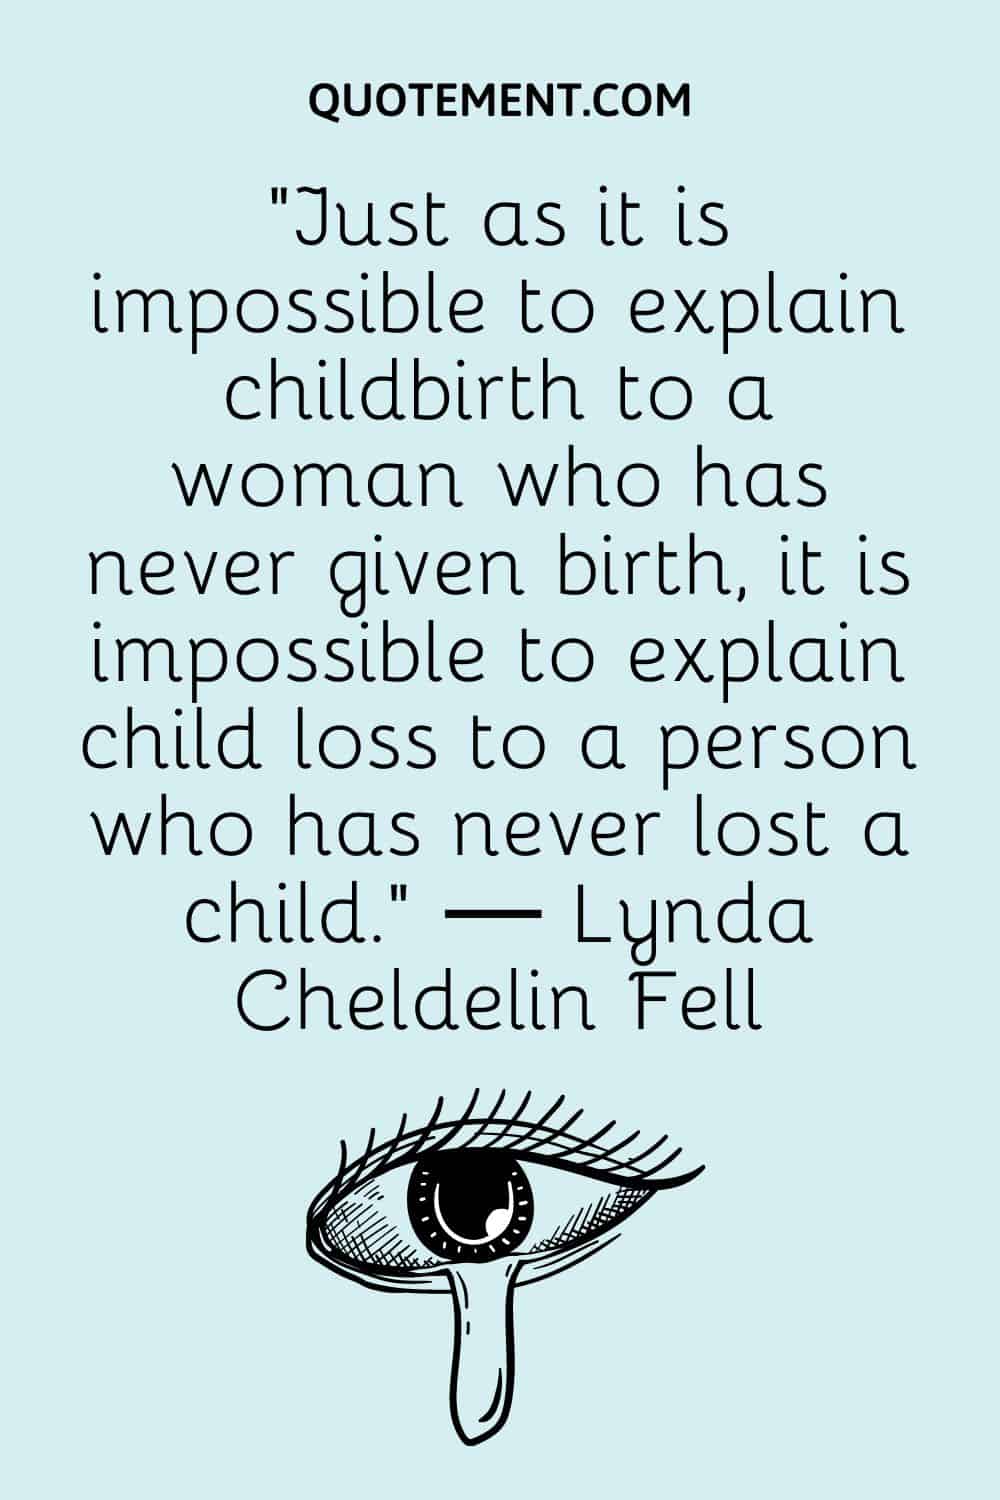 “Just as it is impossible to explain childbirth to a woman who has never given birth, it is impossible to explain child loss to a person who has never lost a child.” ― Lynda Cheldelin Fell